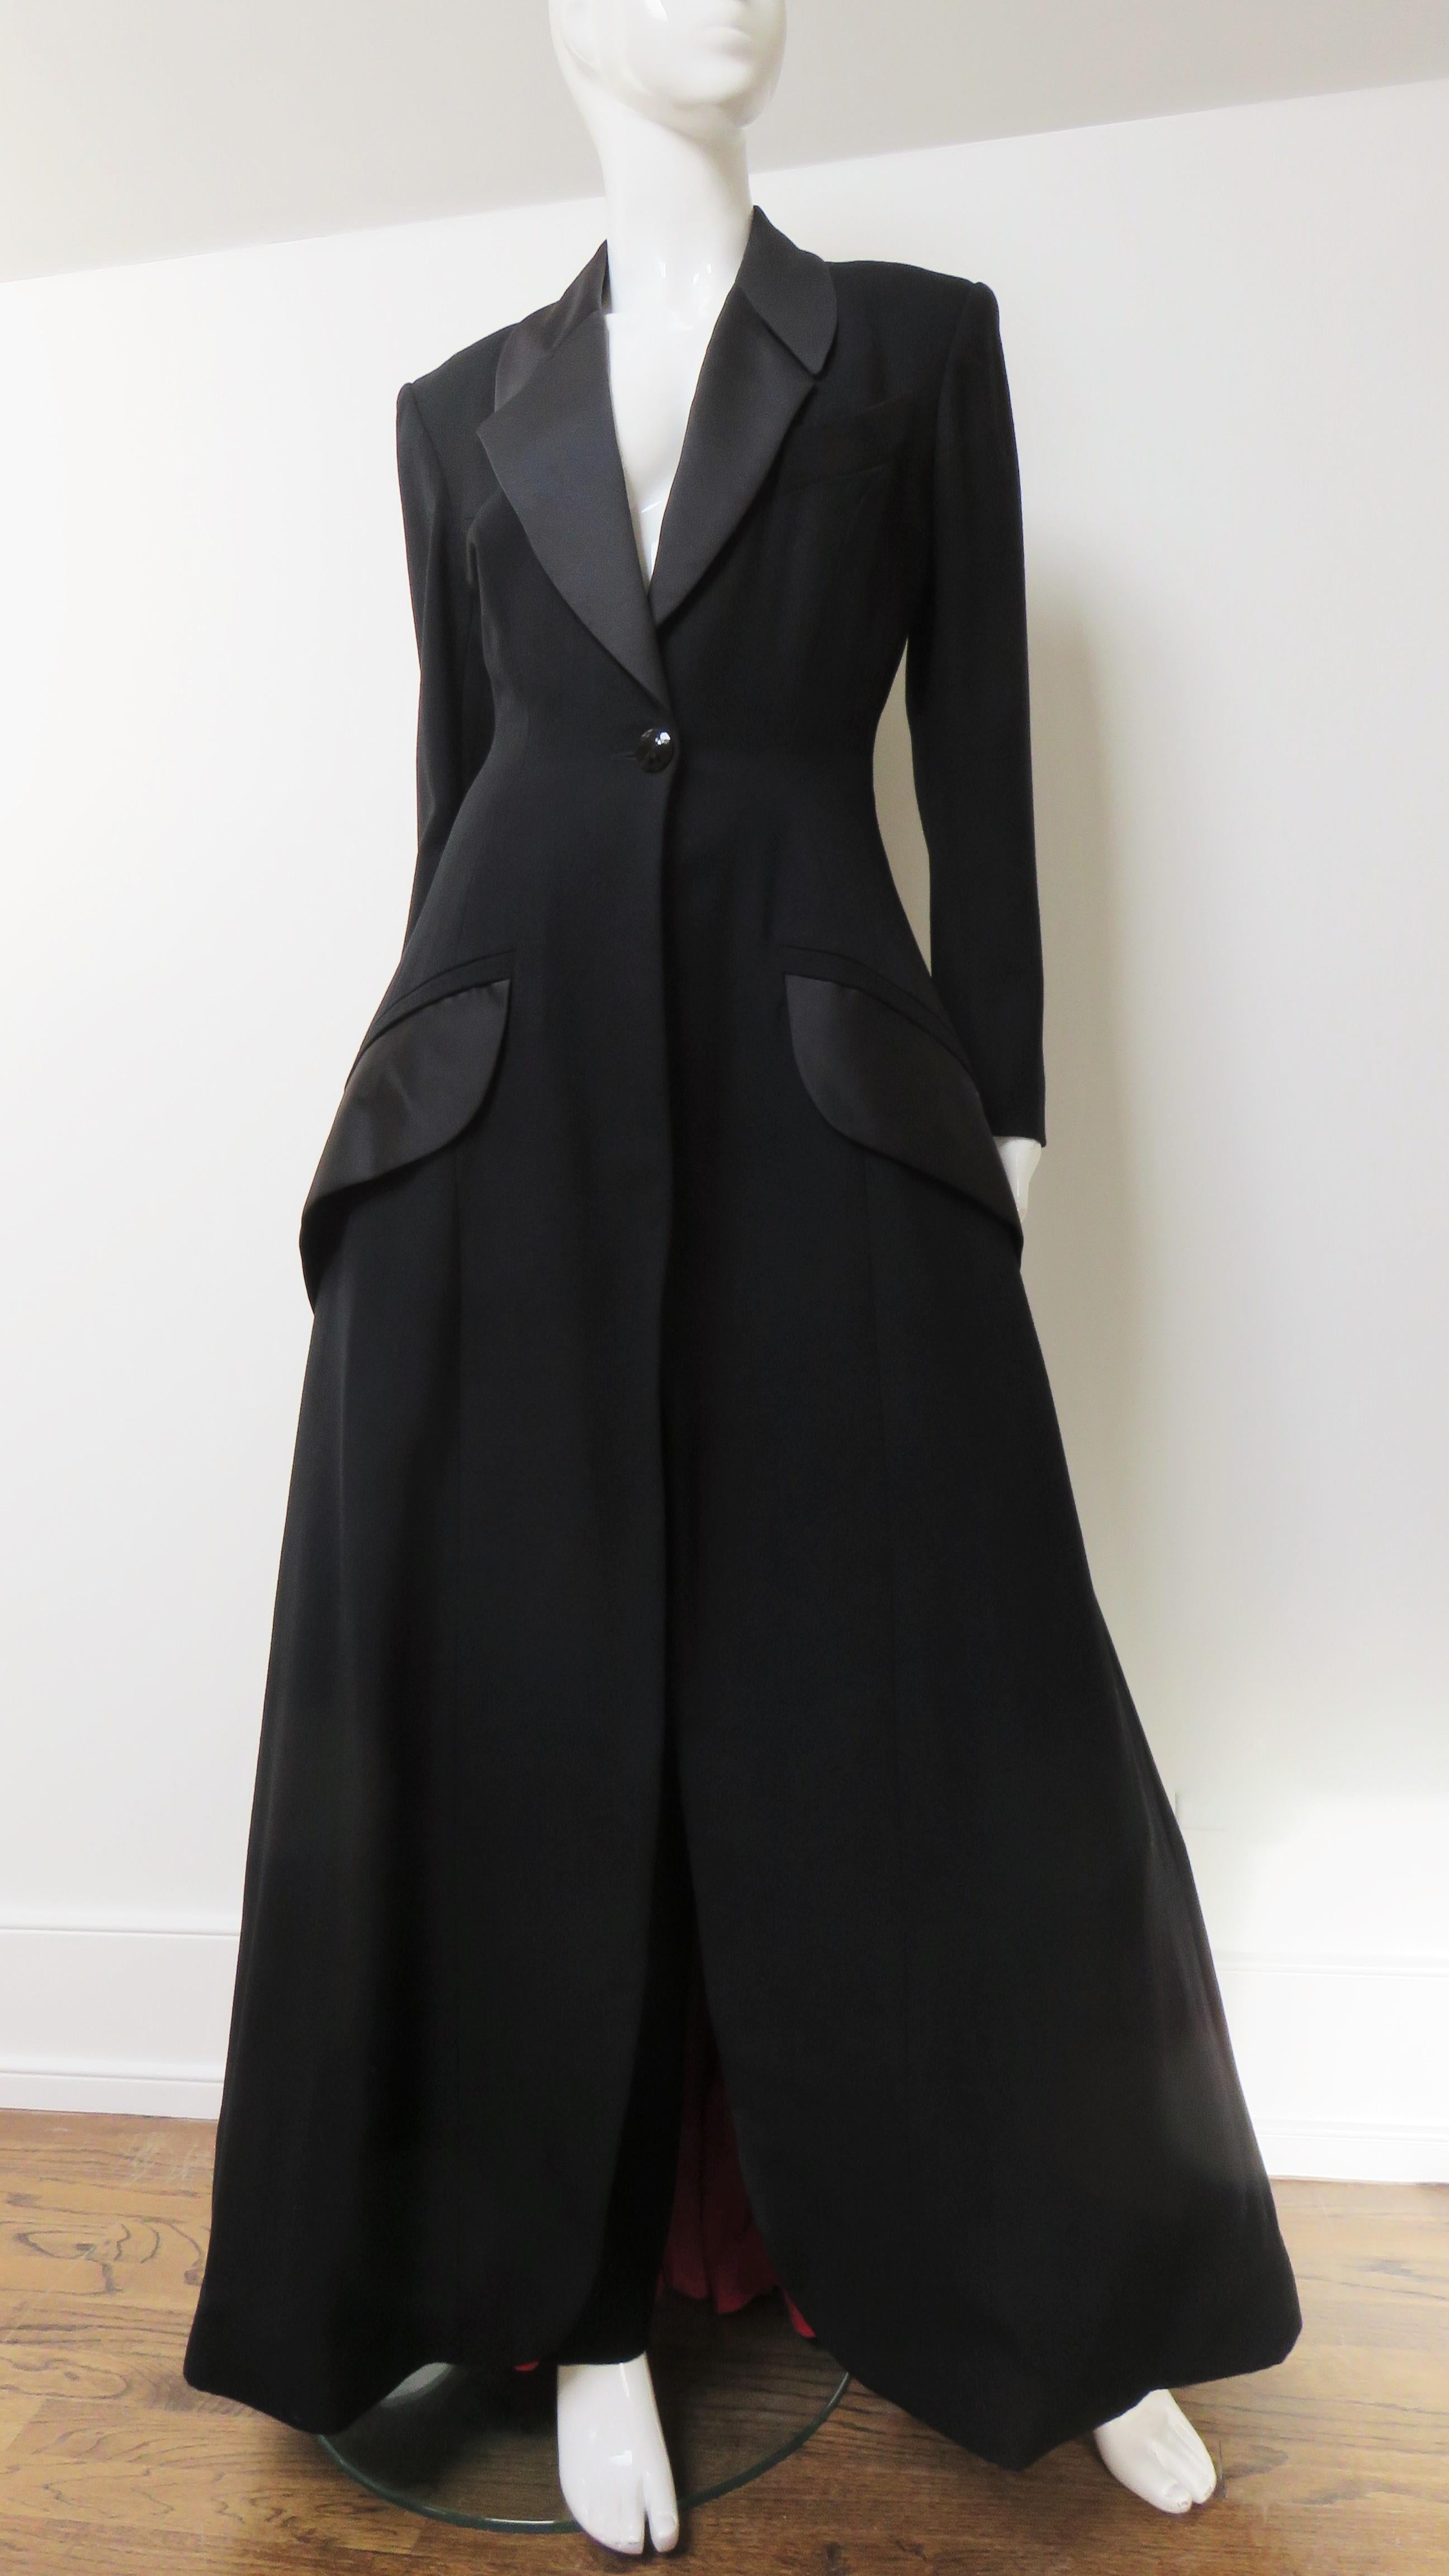 An incredible black wool and silk pant and floor length jacket set from the early couture collection of Byron Lars. The long  jacket has a black silk lapel collar, angled front flap pockets, and shoulder padding. It closes with a large black glass